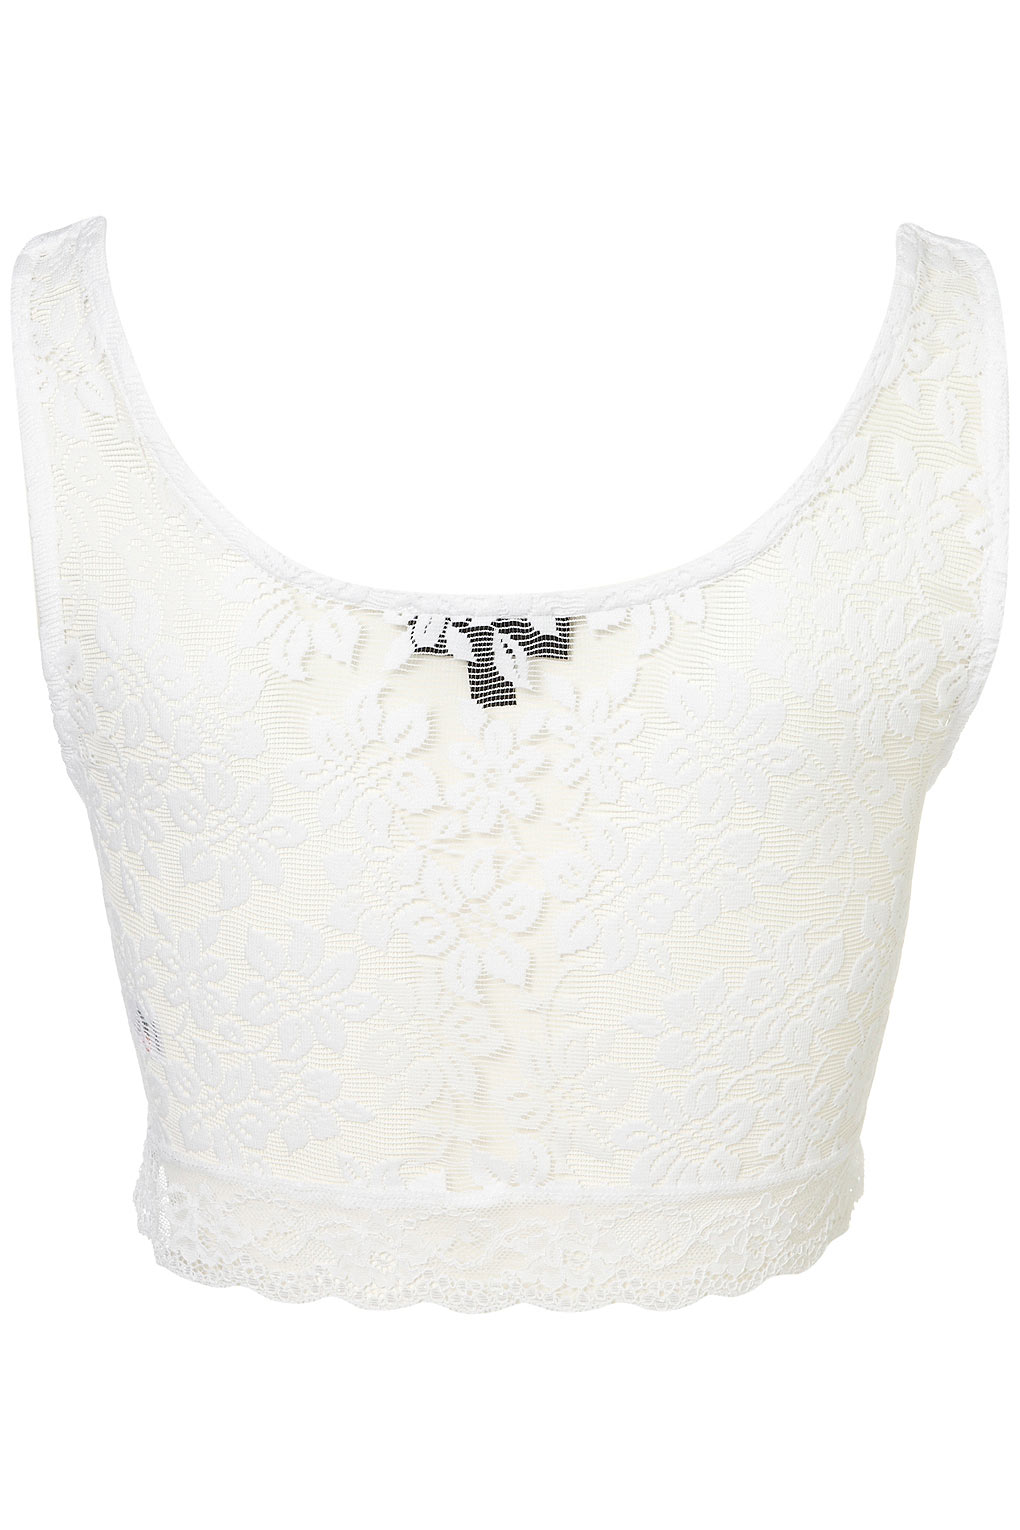 TOPSHOP Lace Crop Top in White - Lyst